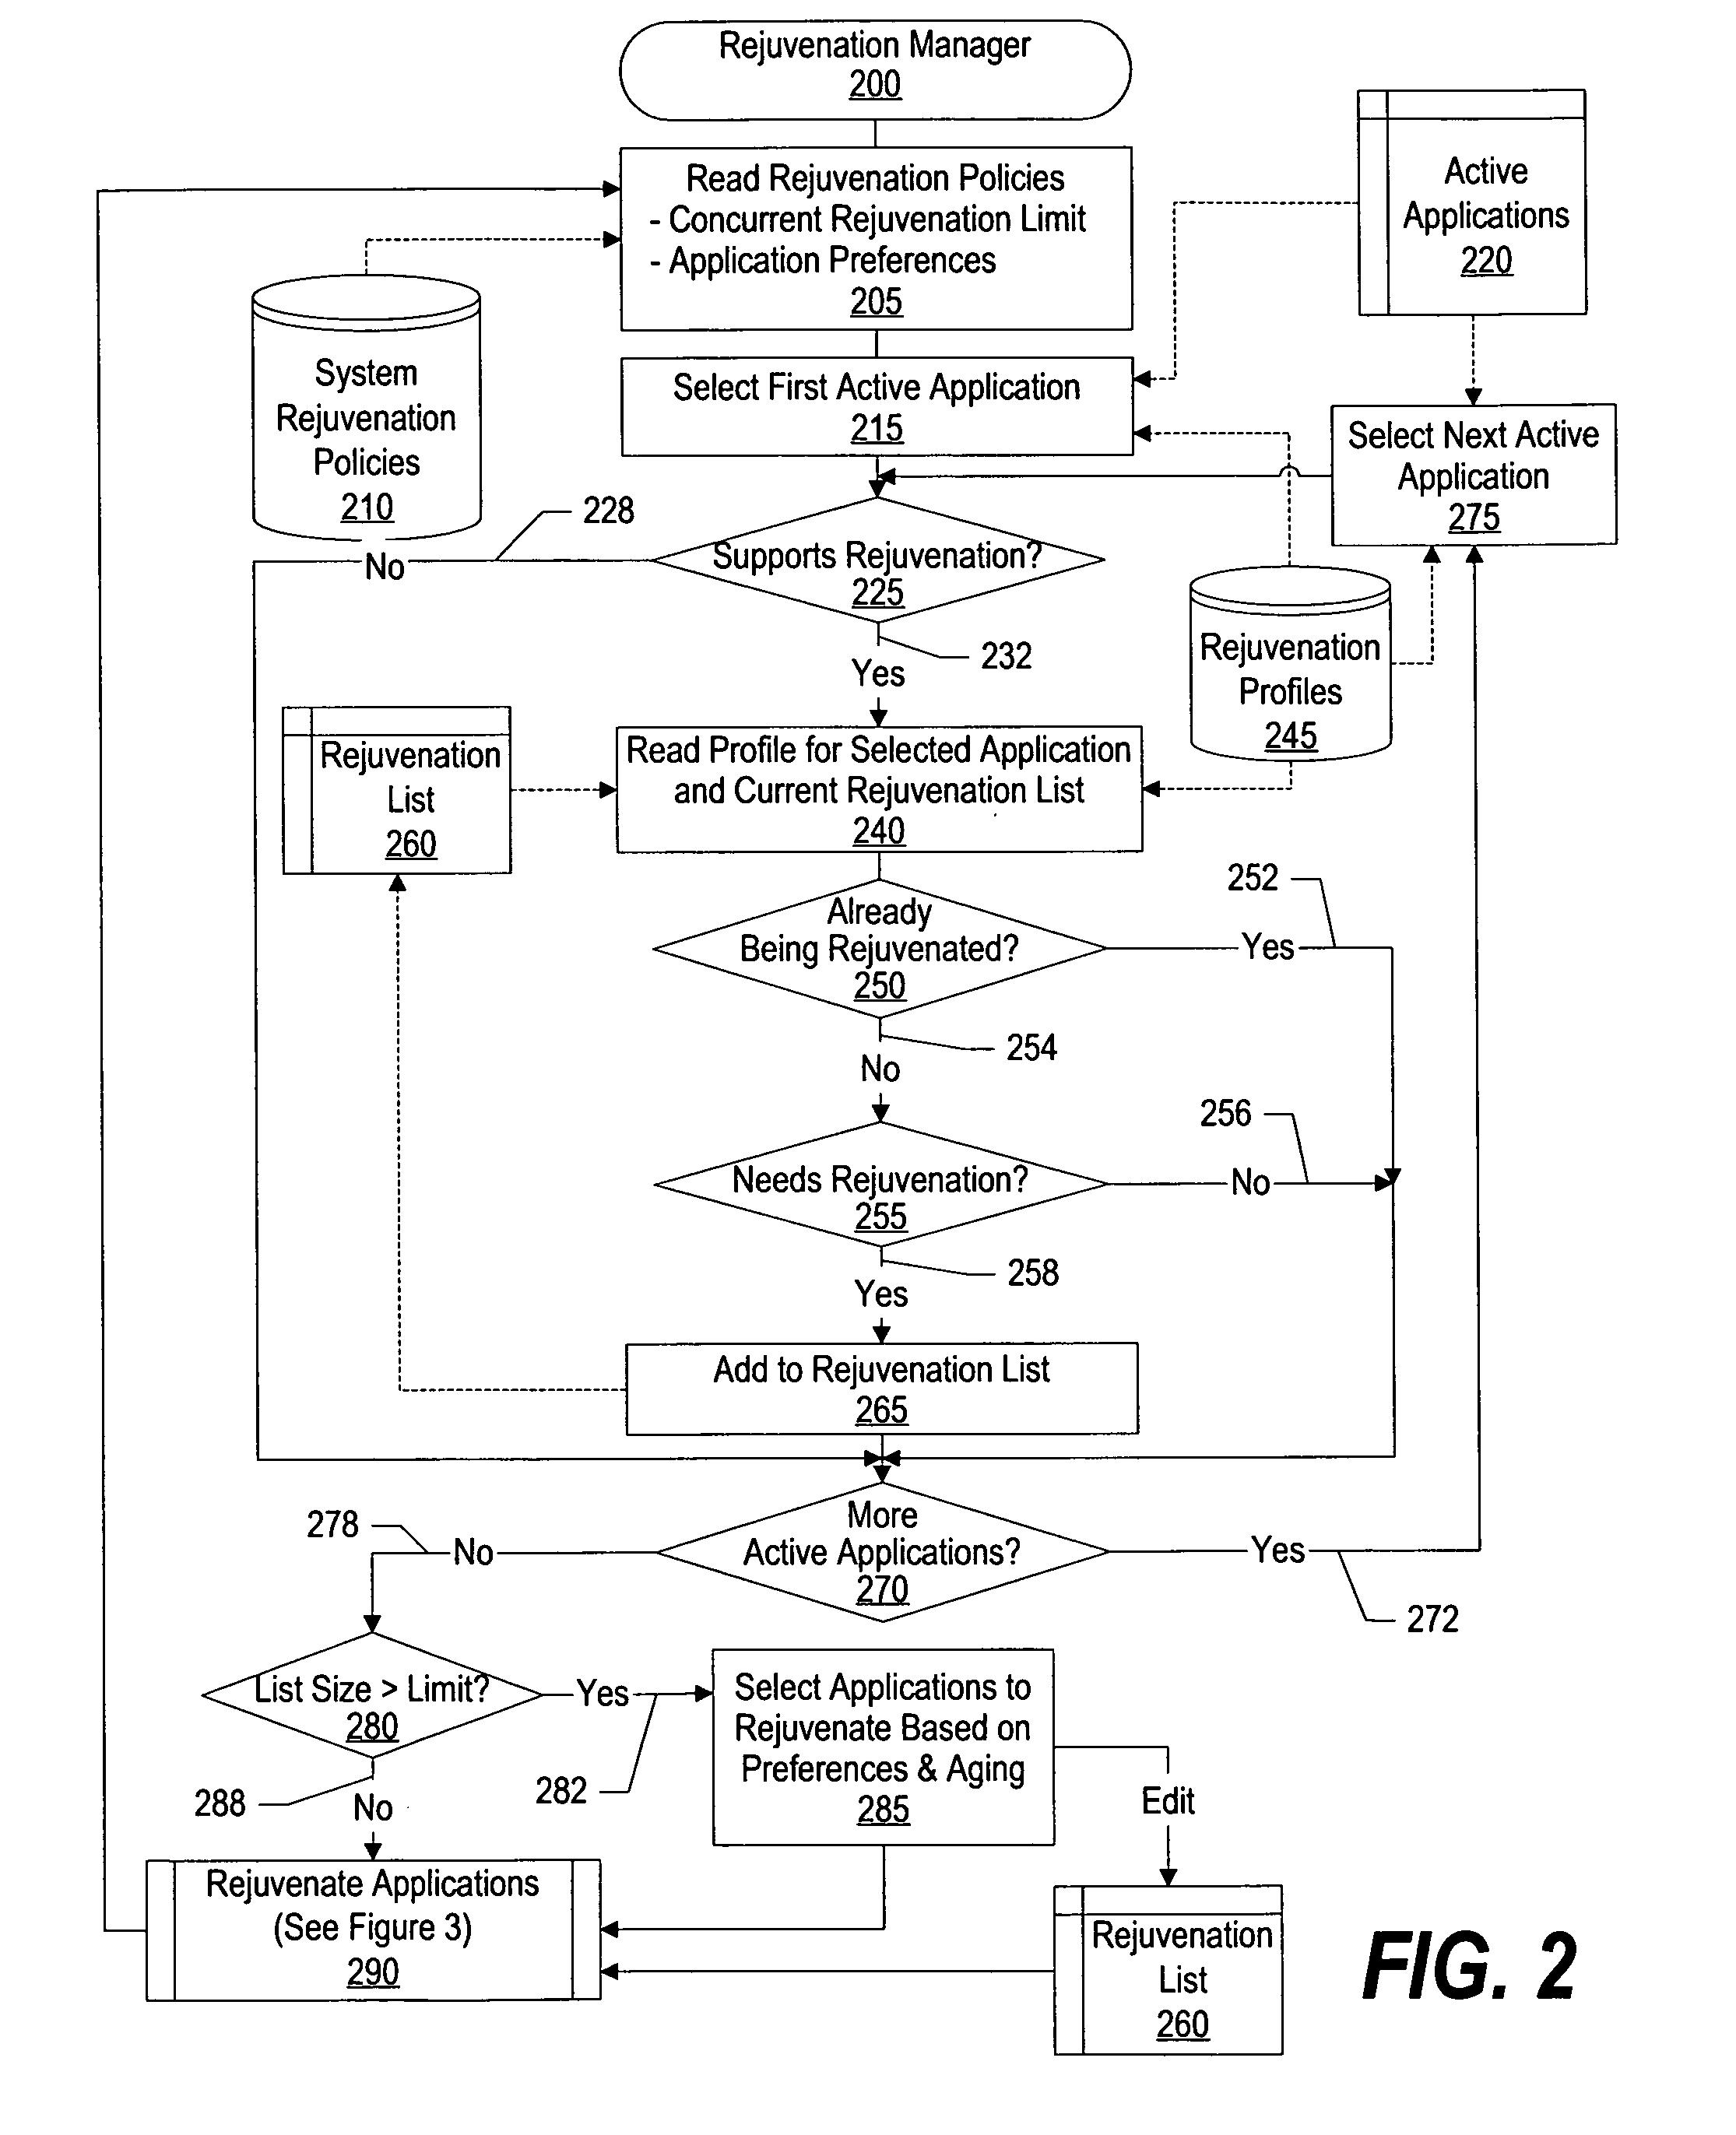 System and method for minimizing software downtime associated with software rejuvenation in a single computer system